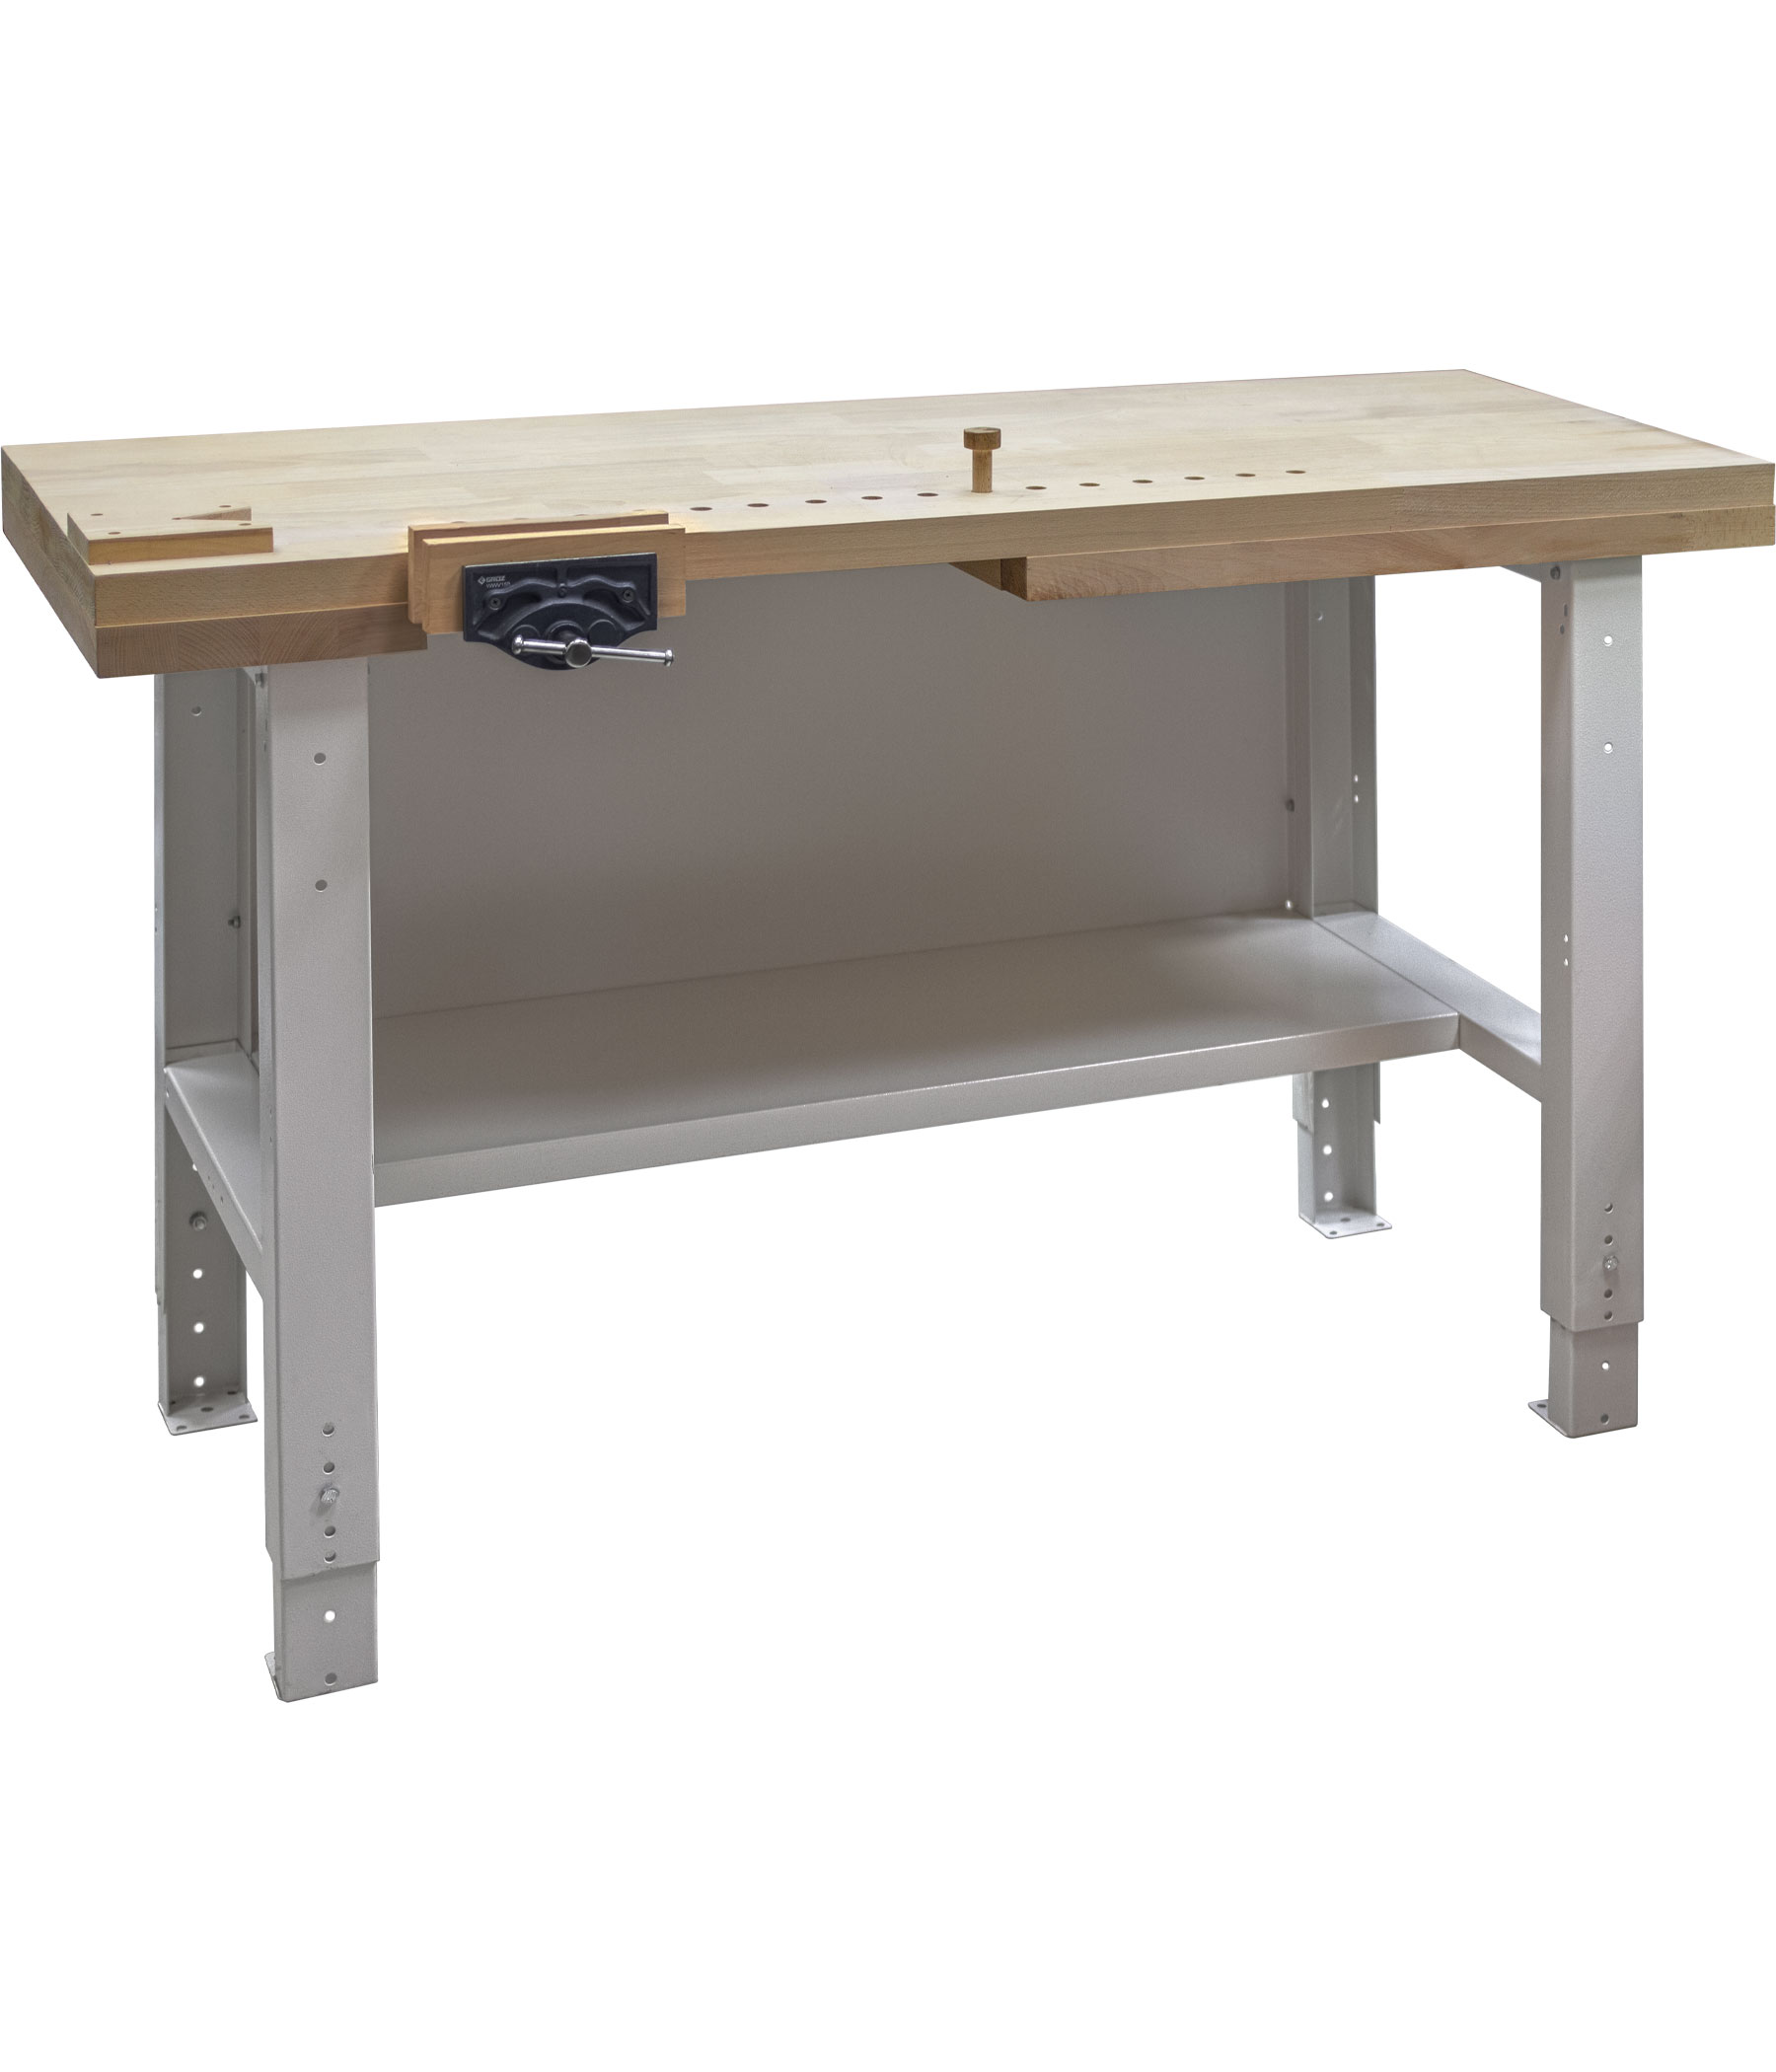 Joiner workbench VS 31 FV with front vice pack